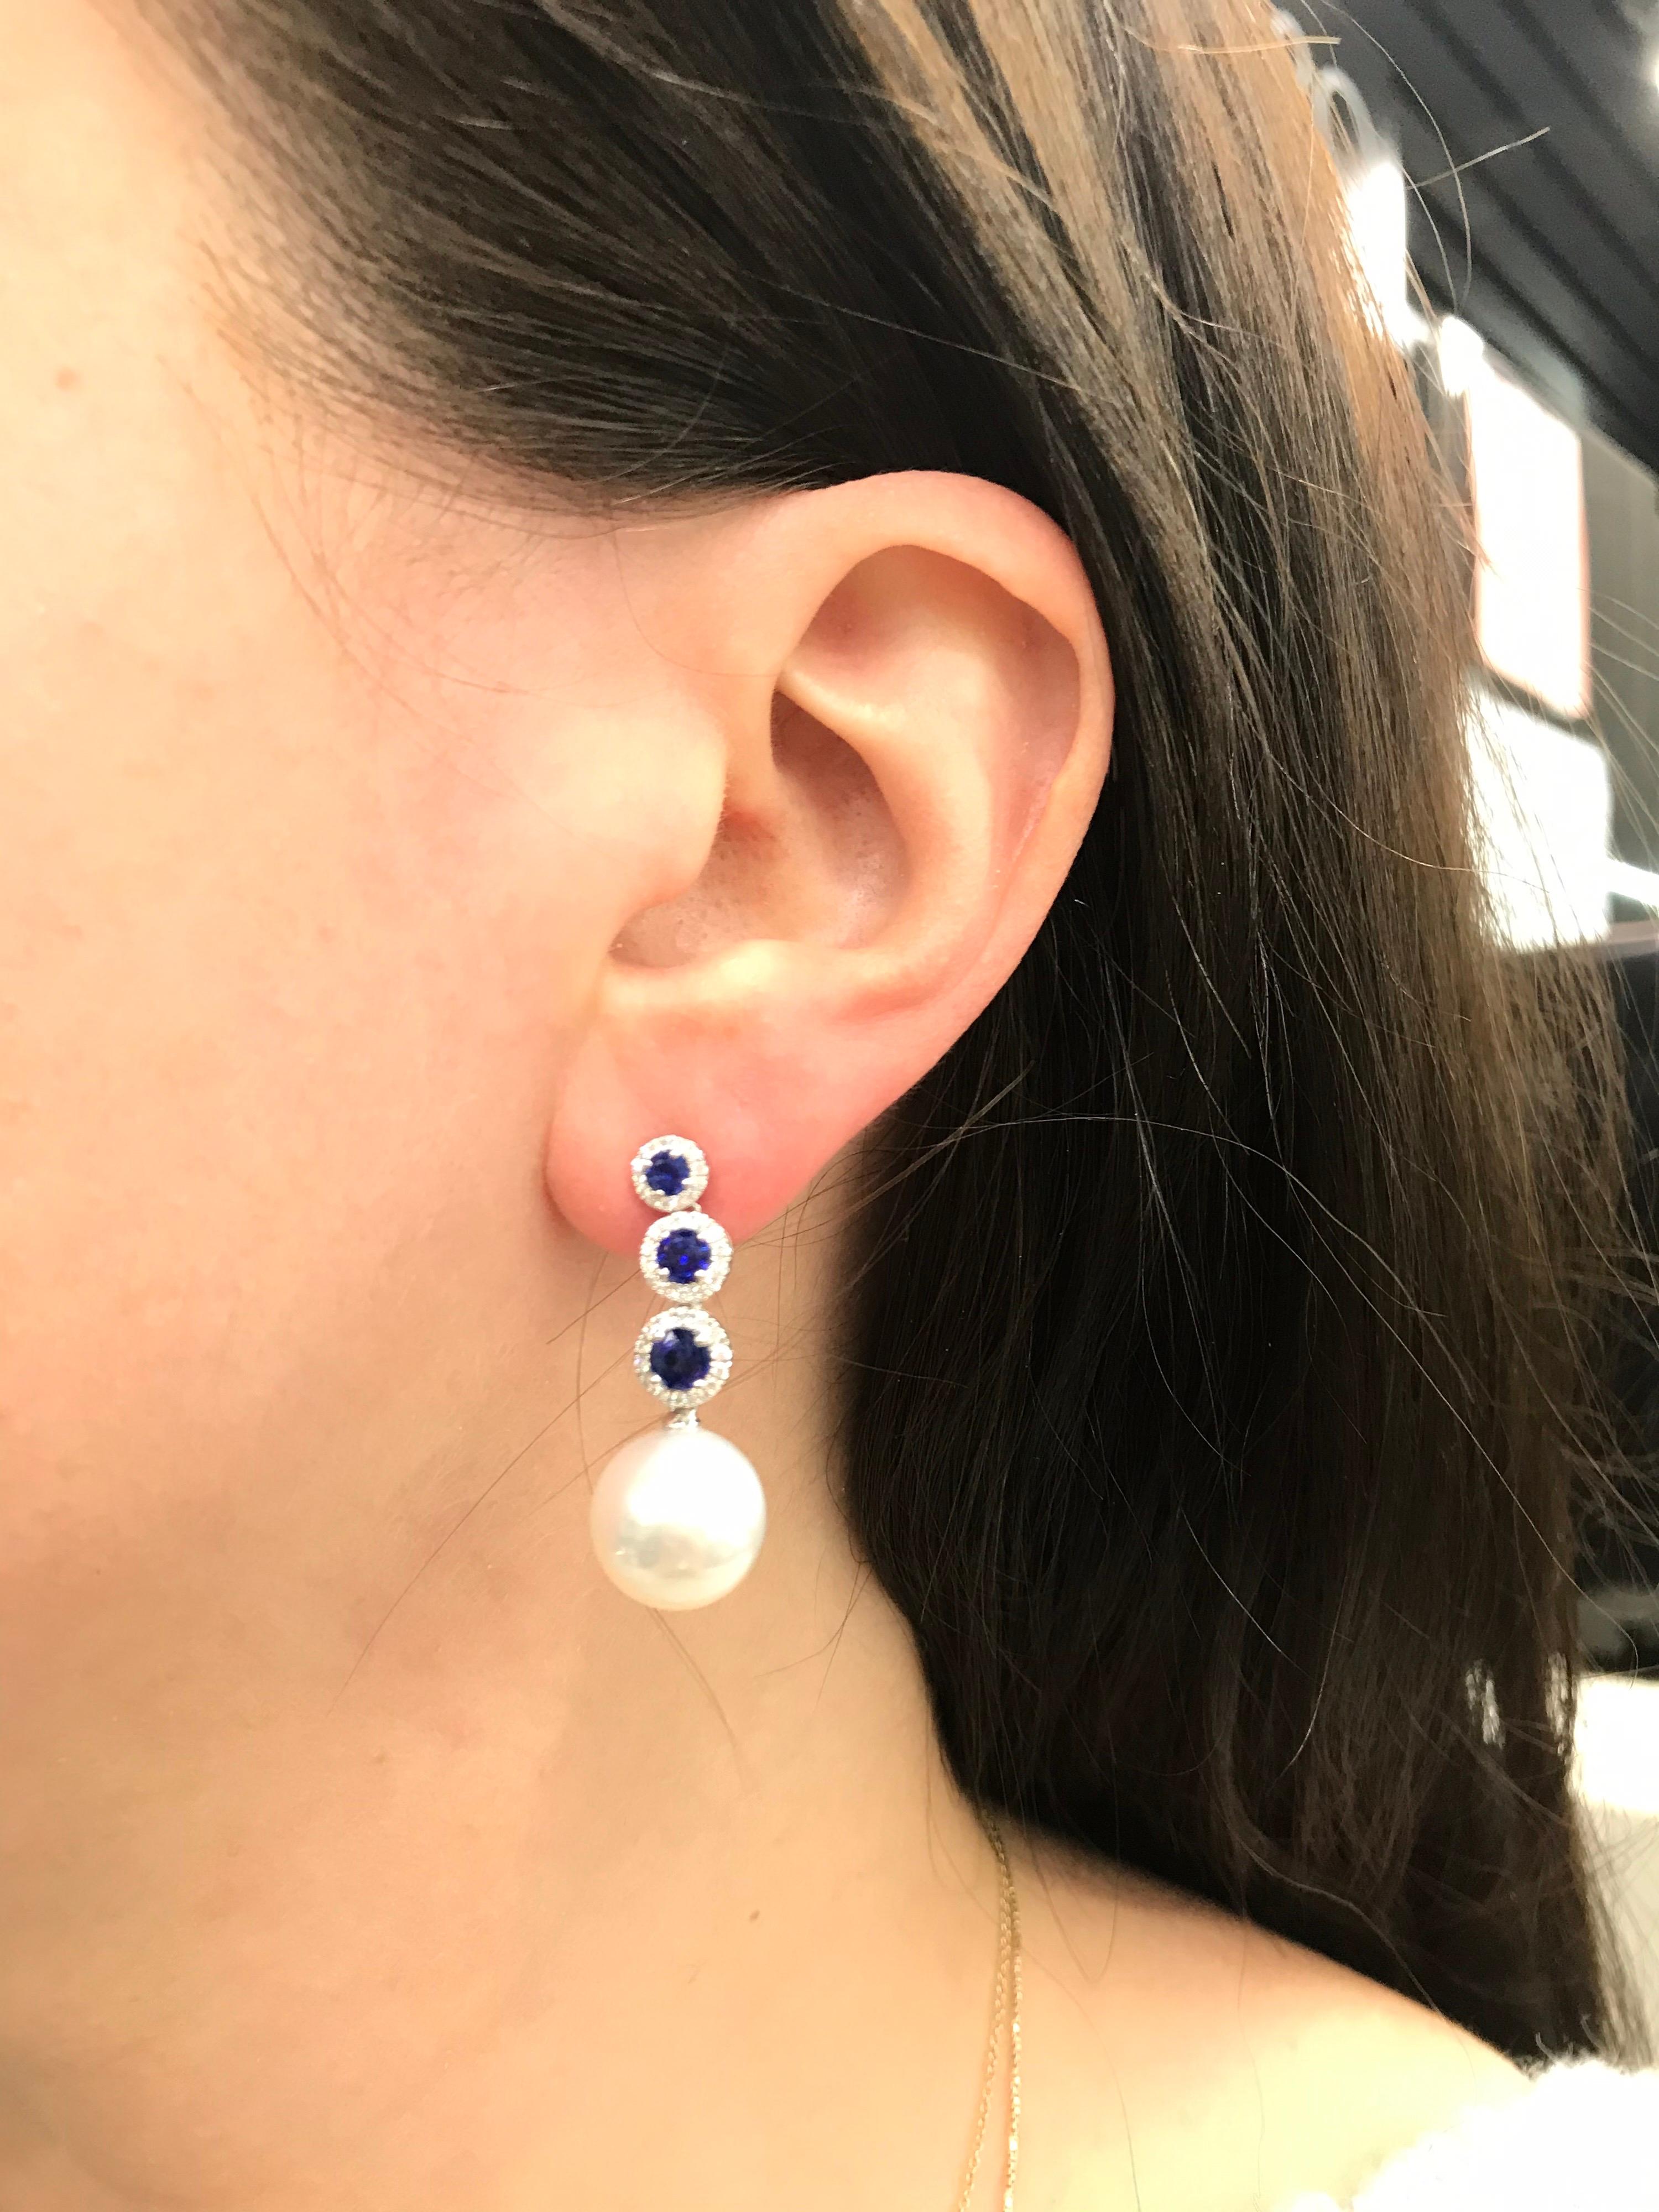 18K White gold drop earrings featuring 6 blue sapphires, 1.50 carats, flanked with round brilliants weighing 0.37 carats and two South Sea Pearls measuring 12-13 mm
Color G-H
Clarity SI